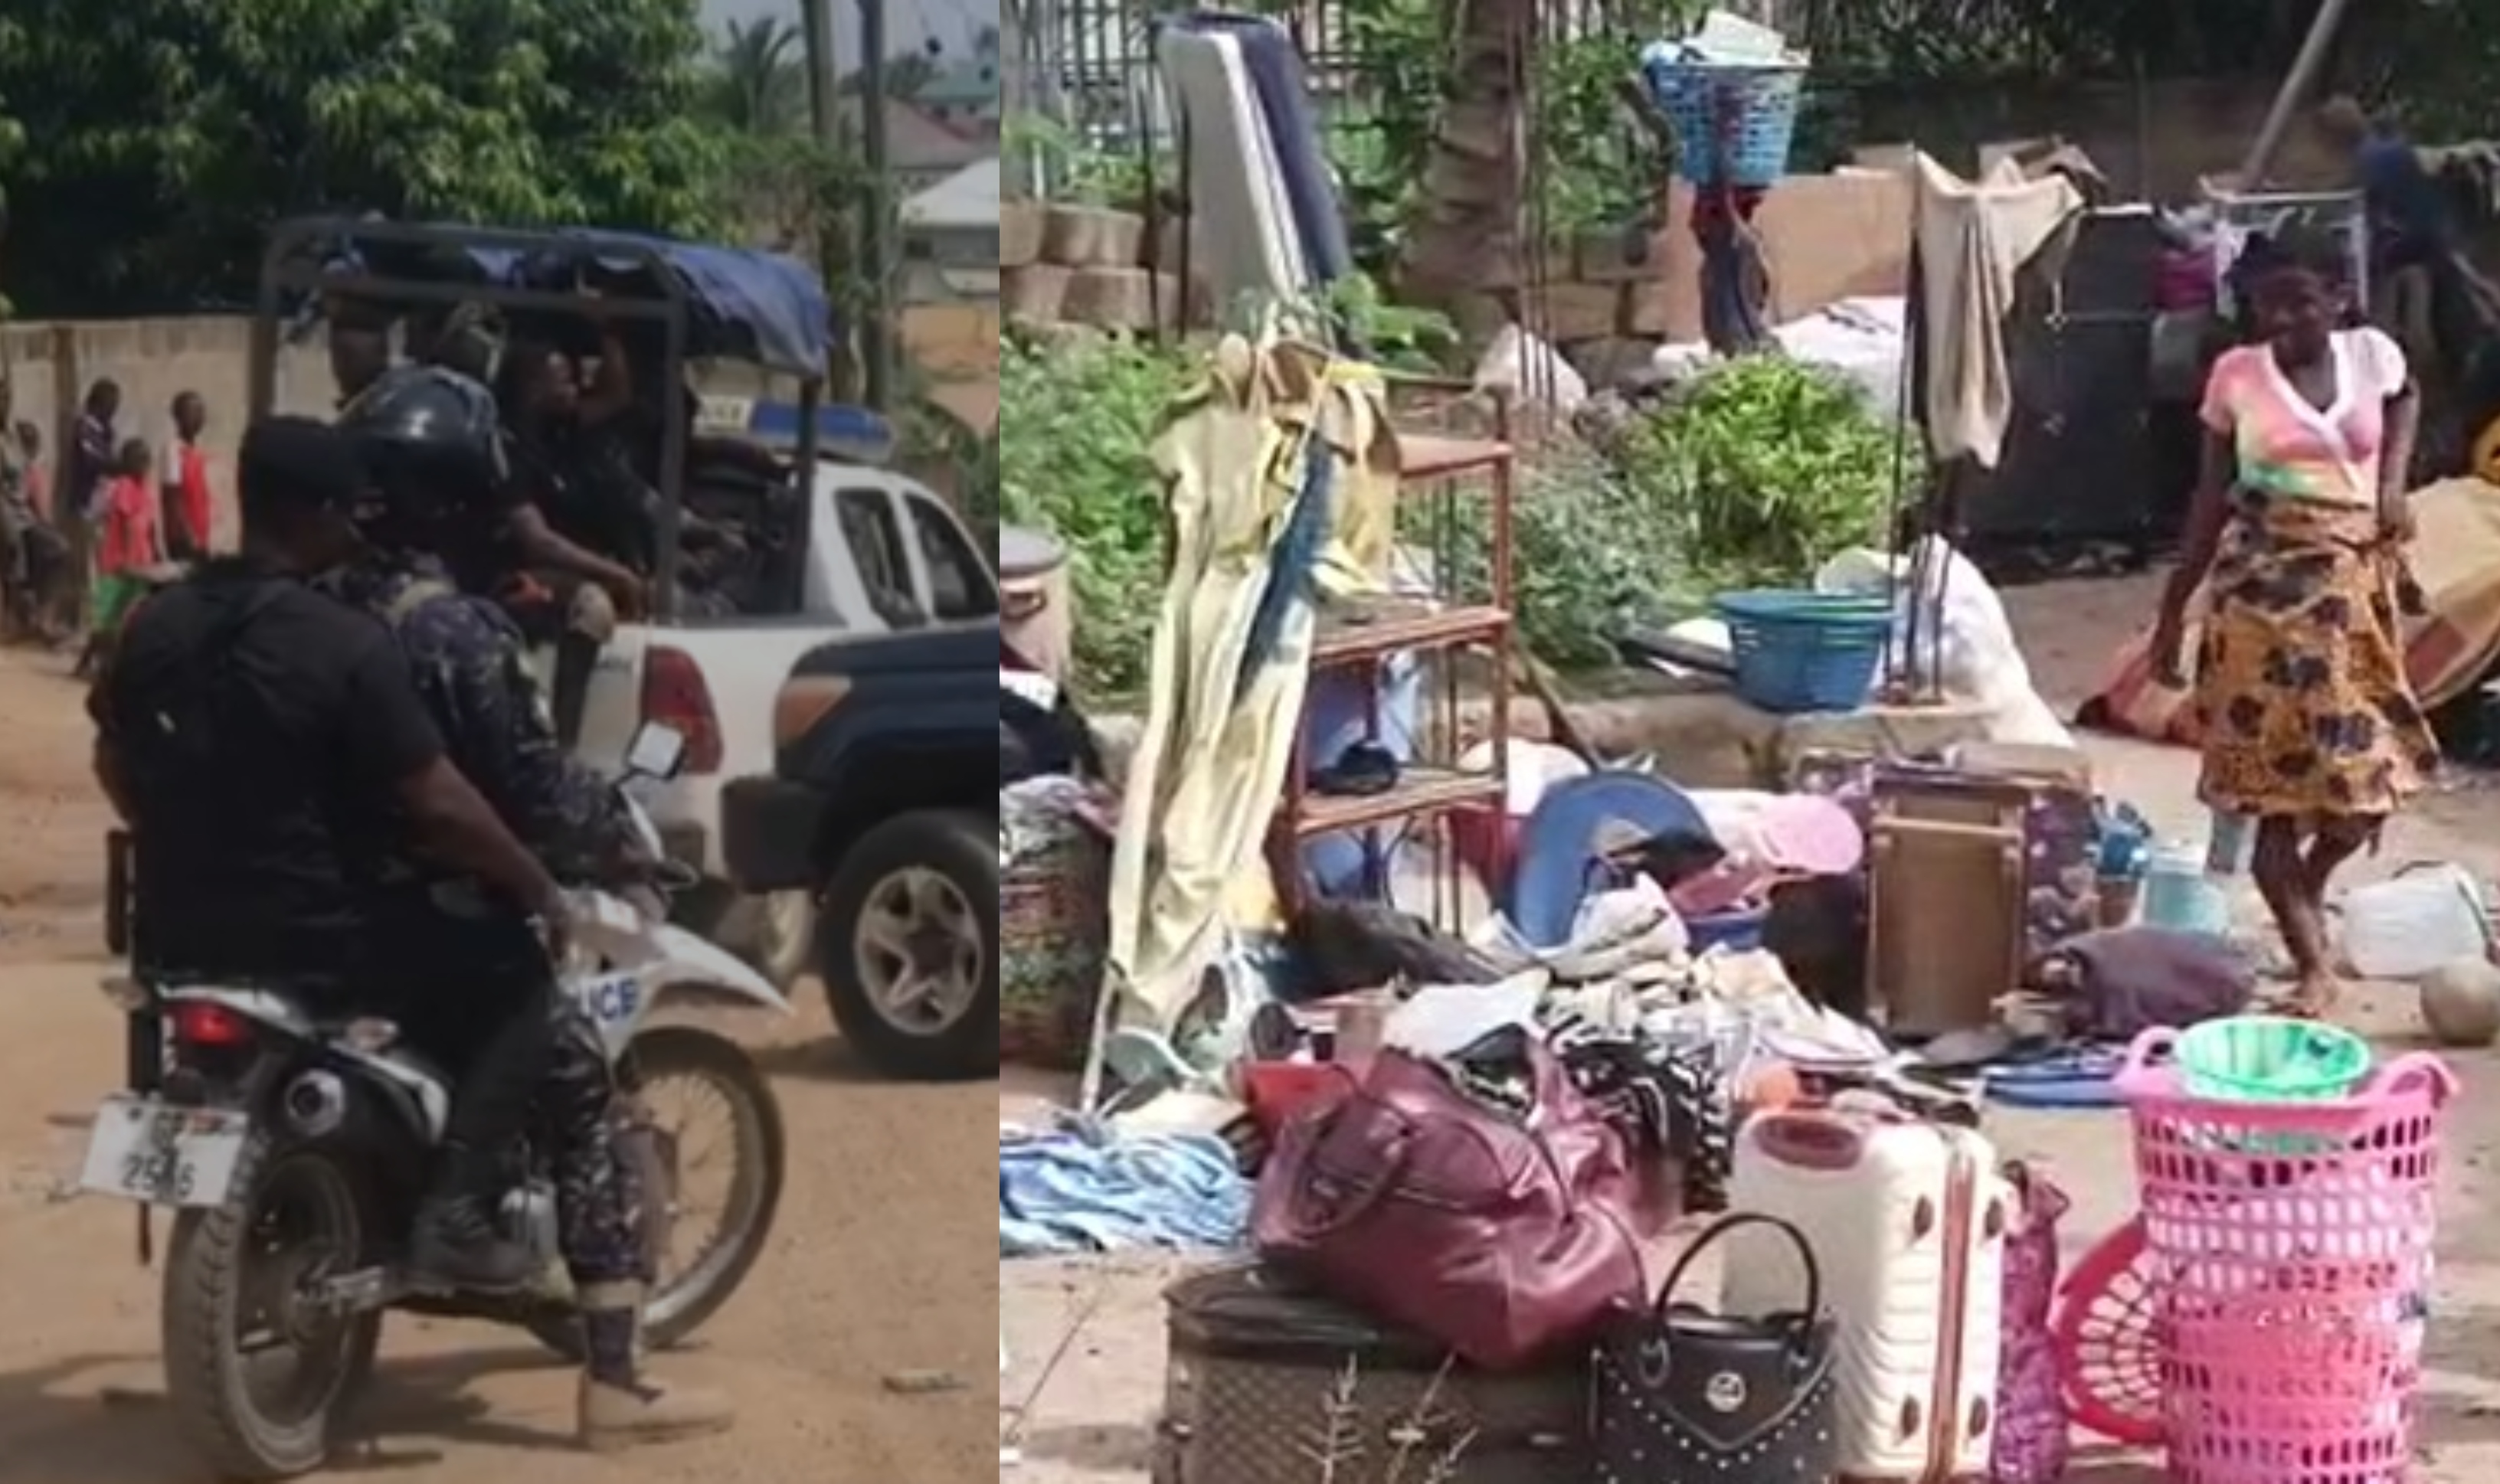 Over 1,000 Buduburam residents homeless as land owner evicts them forcibly with police support